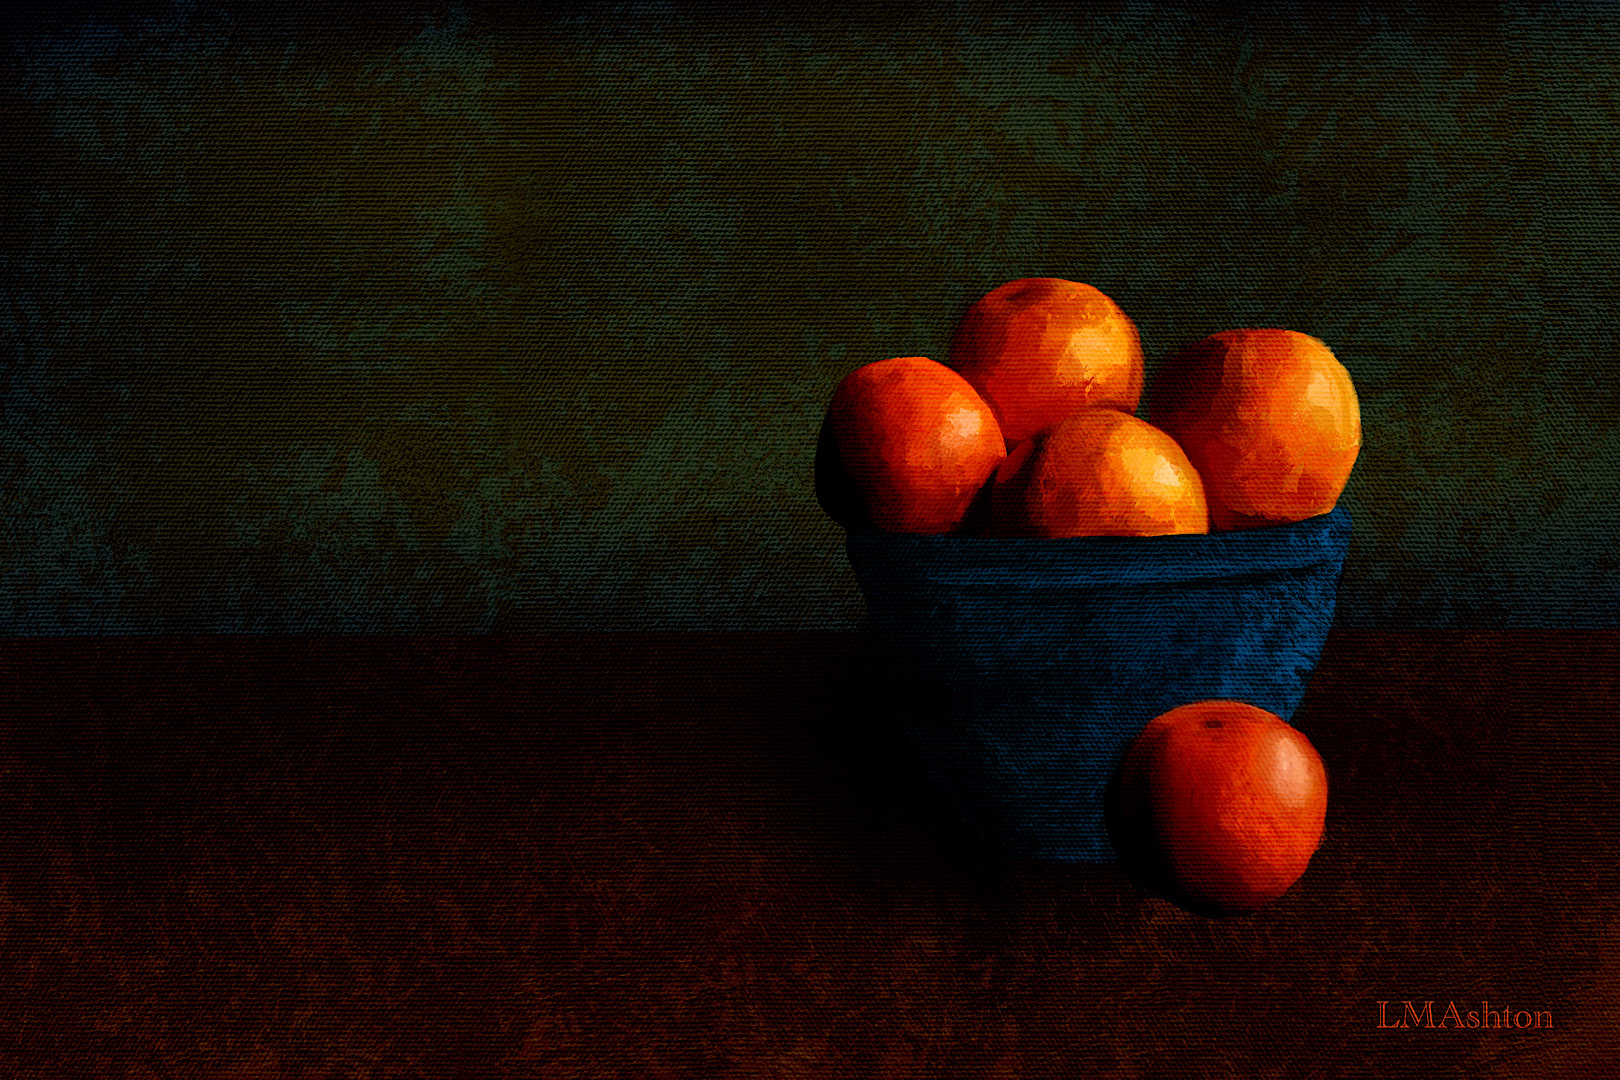 A digital oil painting. Four oranges in a dark blue bowl, one orange on the table in front. The table and background are dark. 